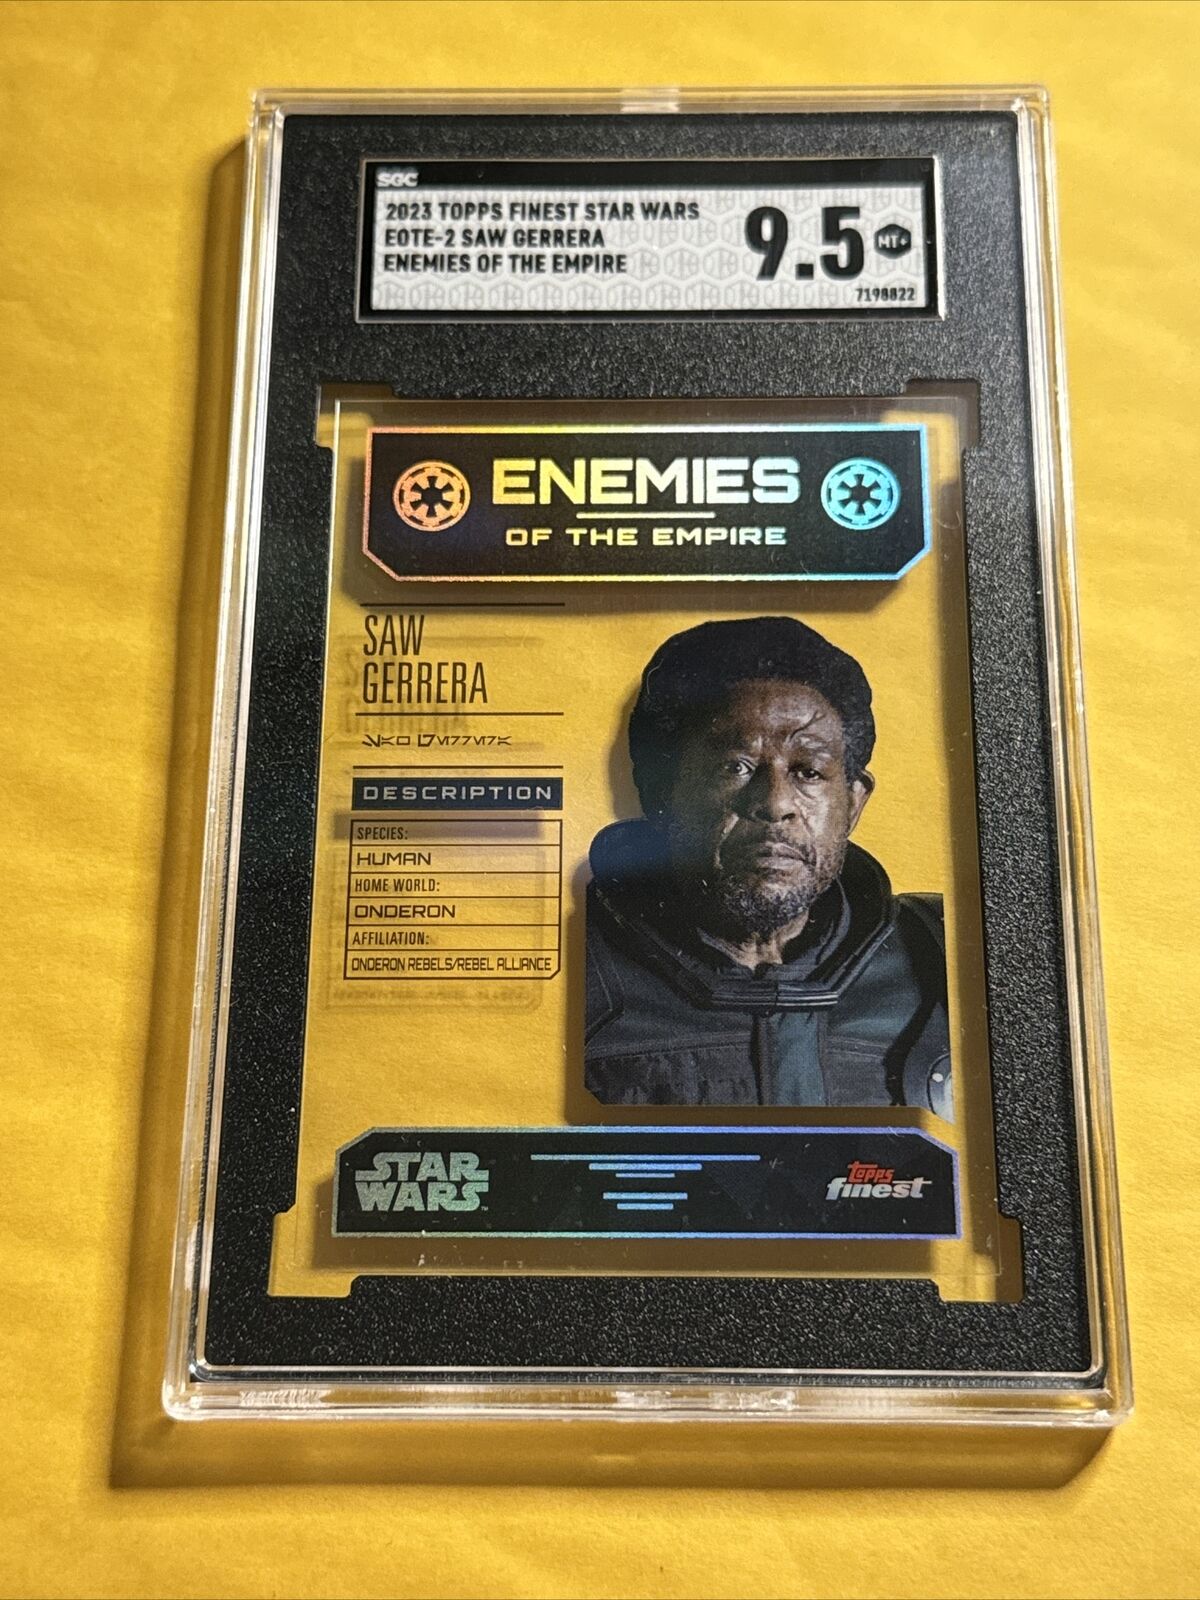 2023 Topps Star Wars Finest Enemies of the Empire Saw Gerrera Case Hit SGC 9.5